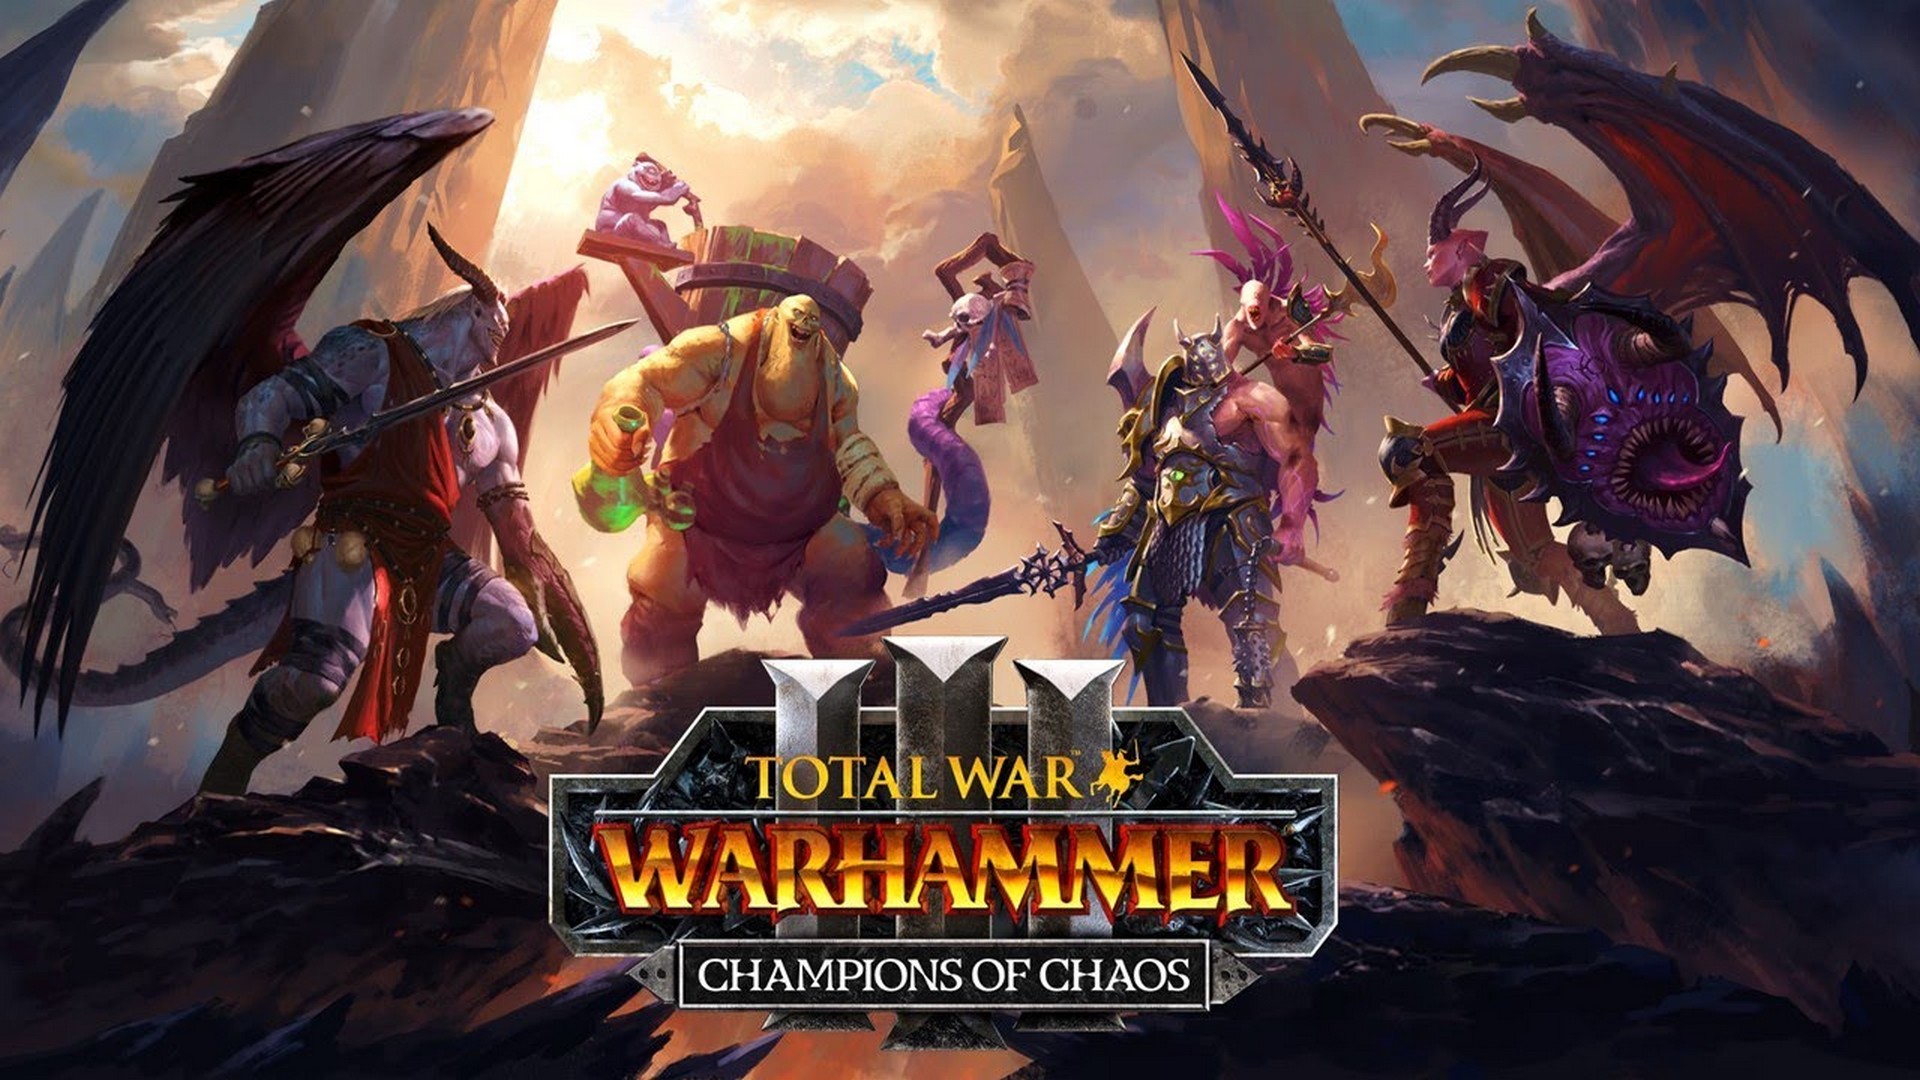 Champions Of Chaos & Immortal Empires (BETA) Out Now For Total War: Warhammer III